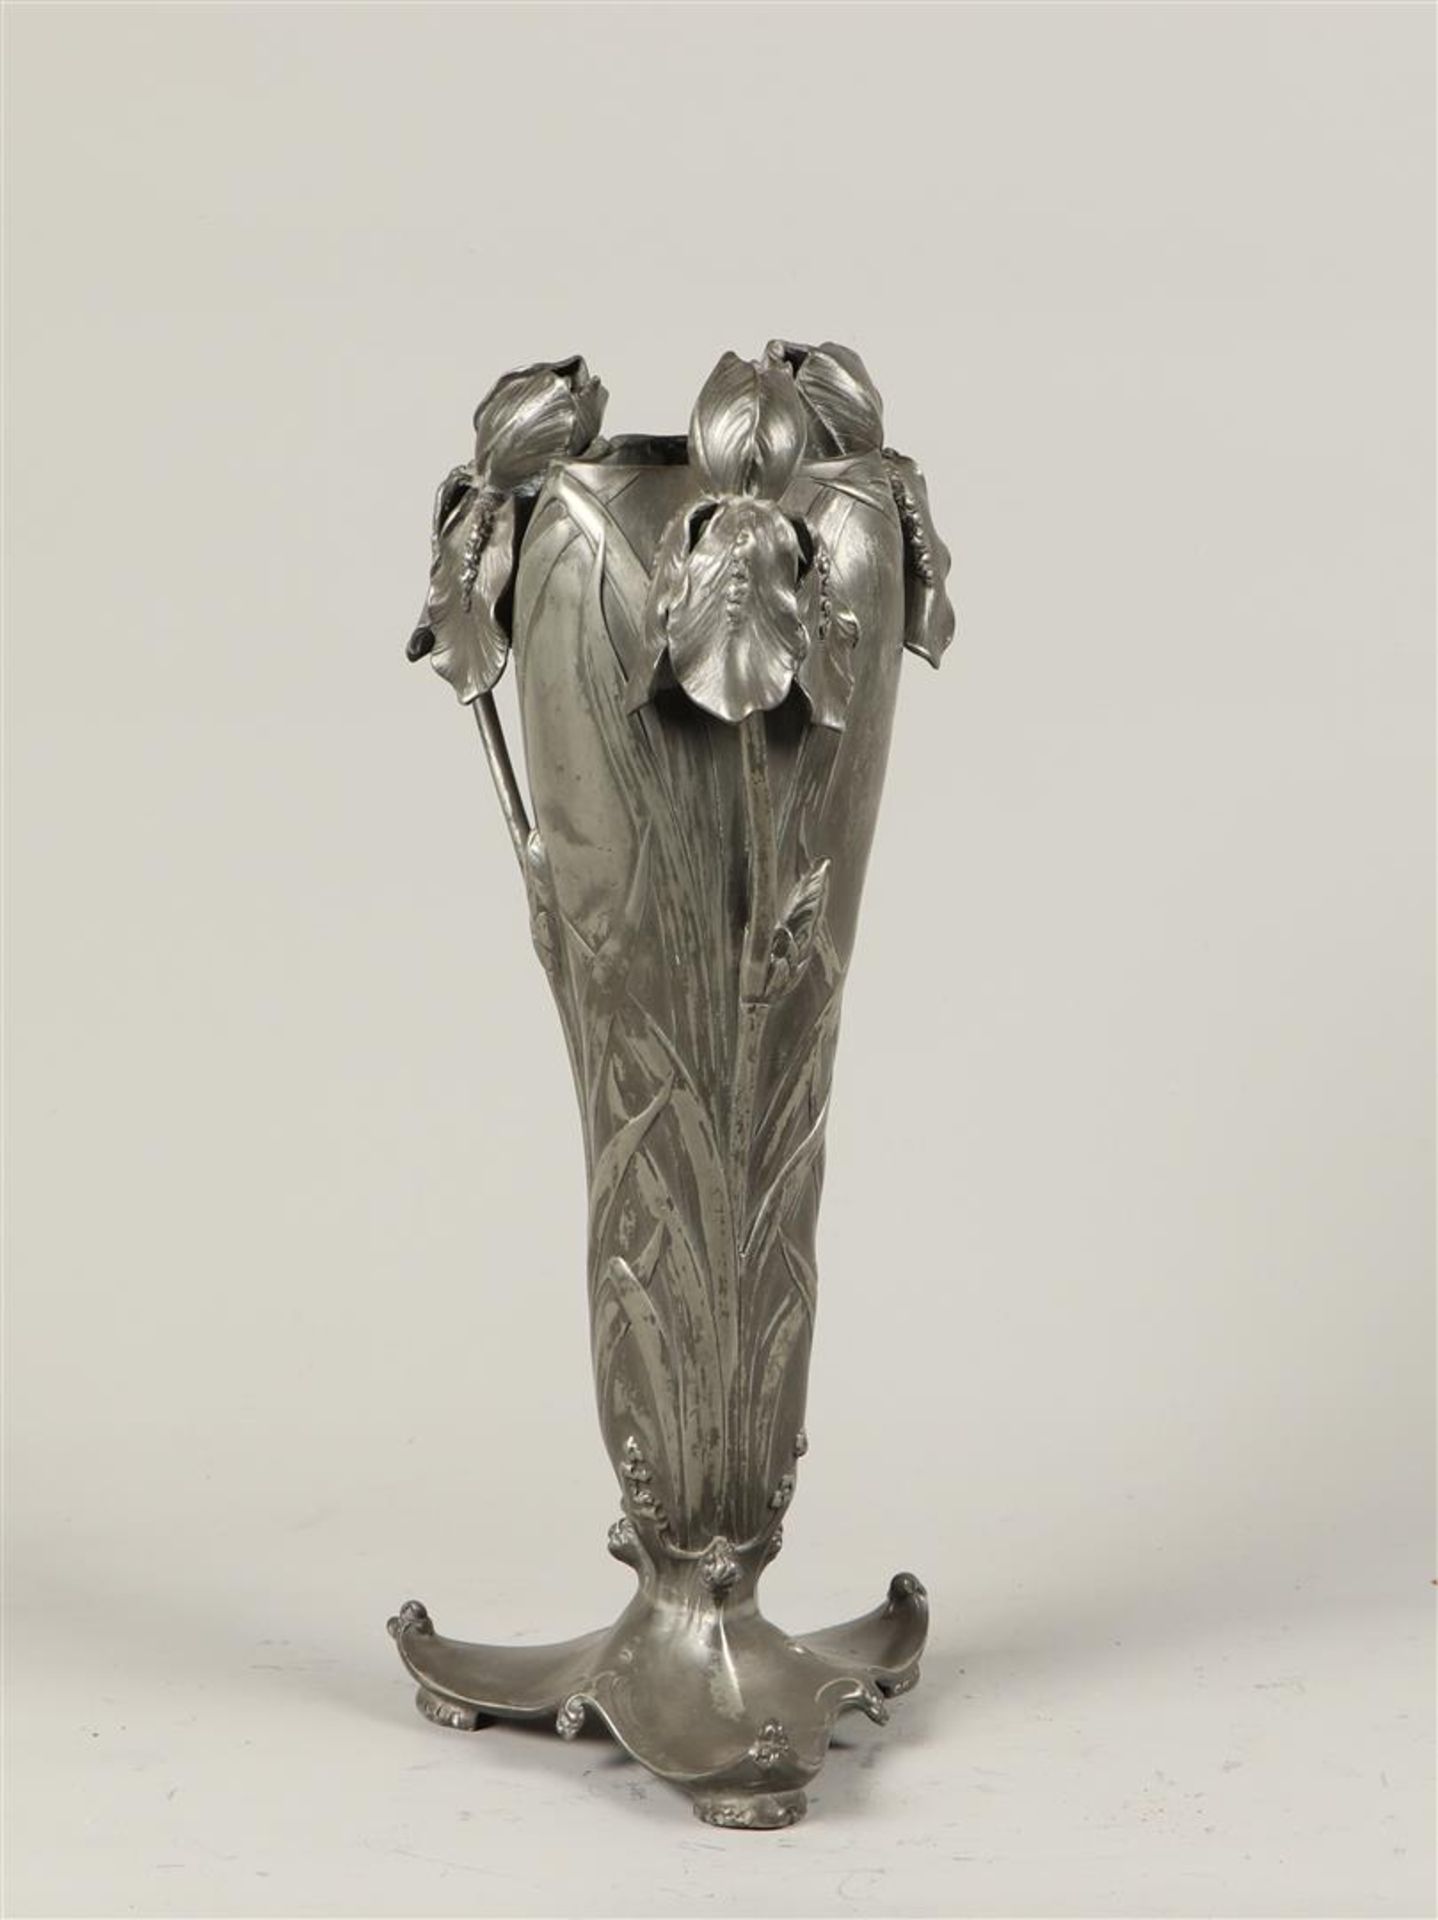 A pewter flower vase with Irises, marked B&G Imperial Zinn.